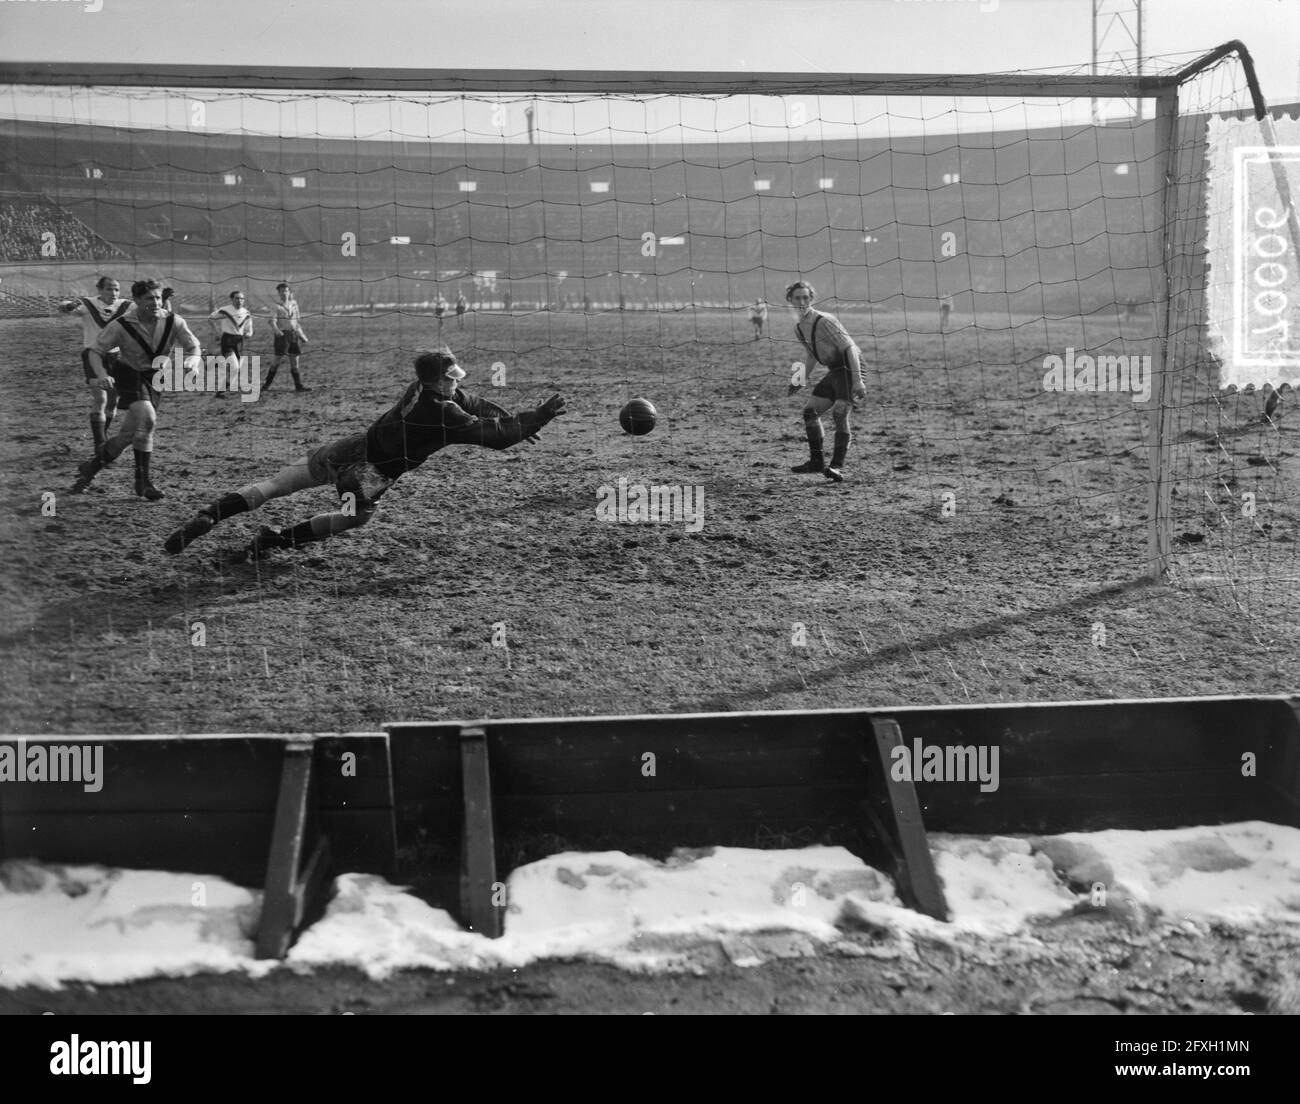 Soccer Amsterdam against DOS 4-1, goal, March 6, 1955, goals, sports, soccer, The Netherlands, 20th century press agency photo, news to remember, documentary, historic photography 1945-1990, visual stories, human history of the Twentieth Century, capturing moments in time Stock Photo